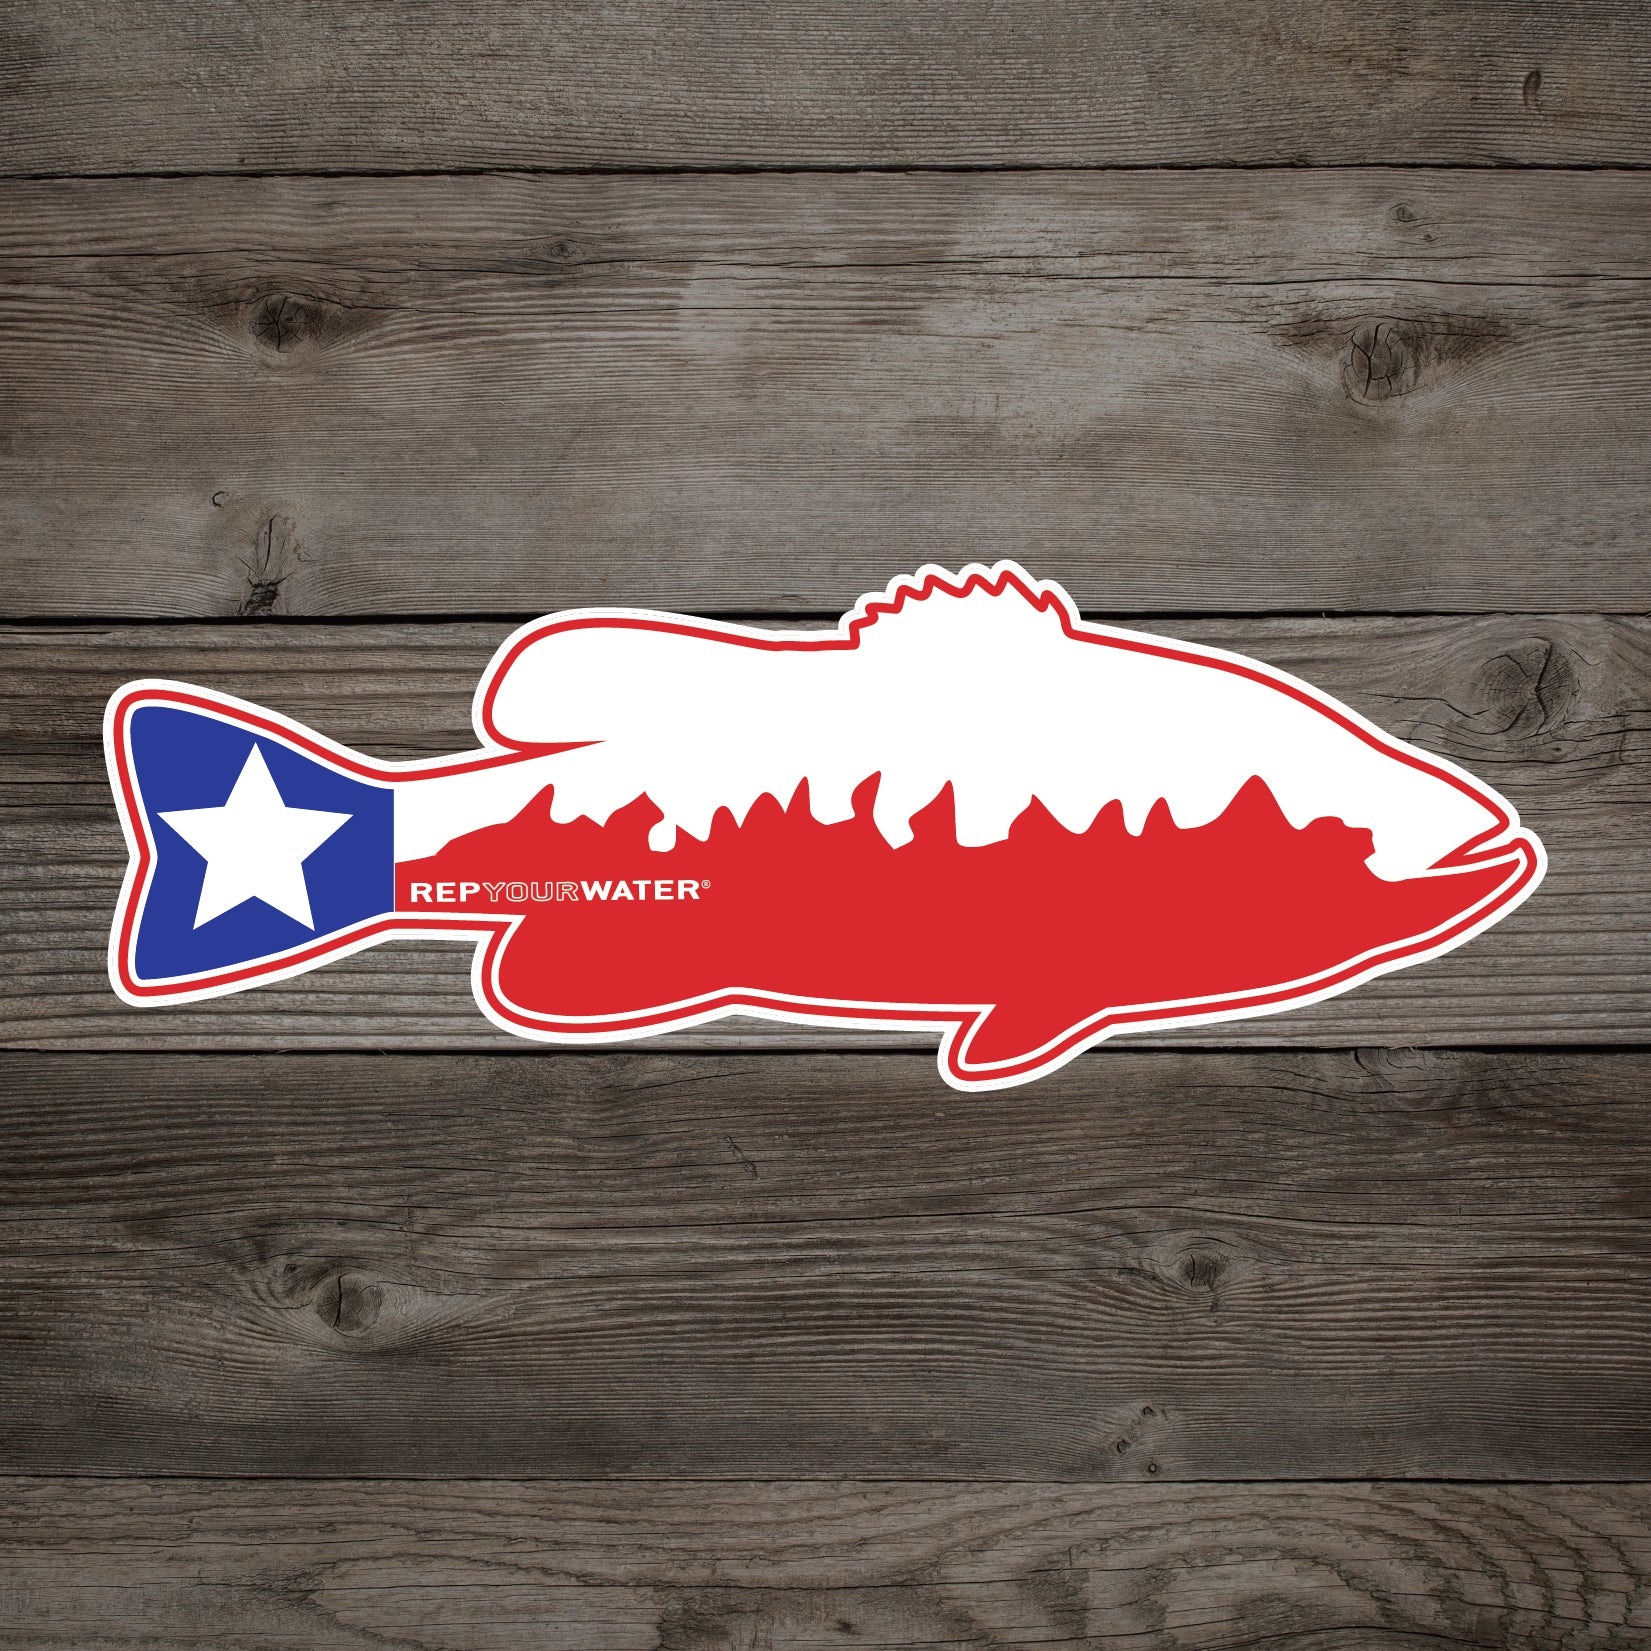 A sticker on a wood background features a bass in the colors and design of the texas flag